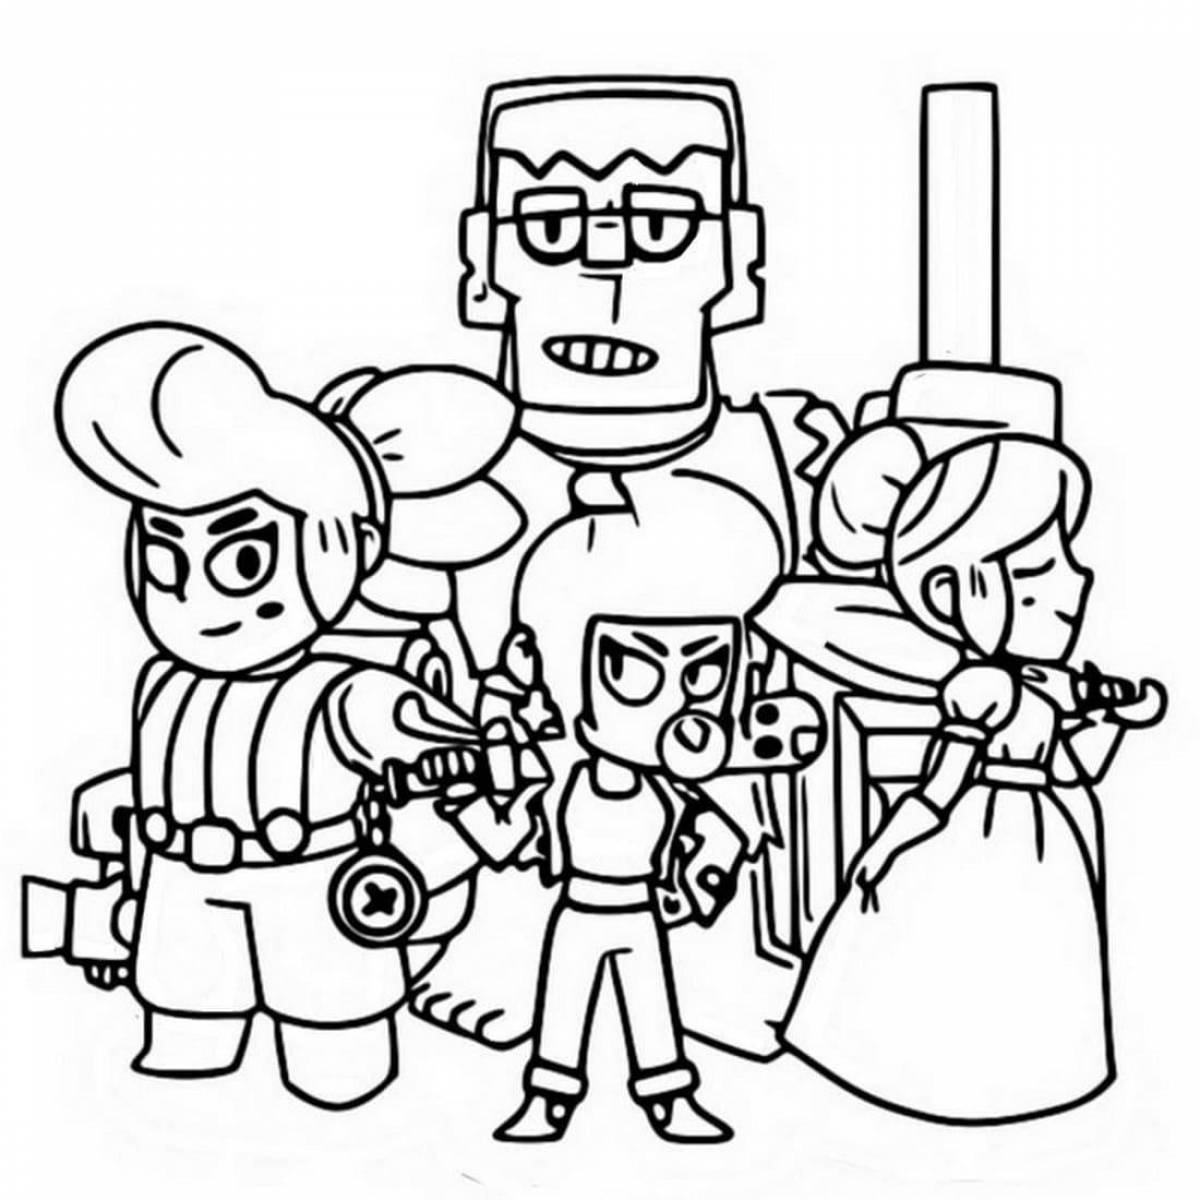 Brawl stars amazing coloring pages